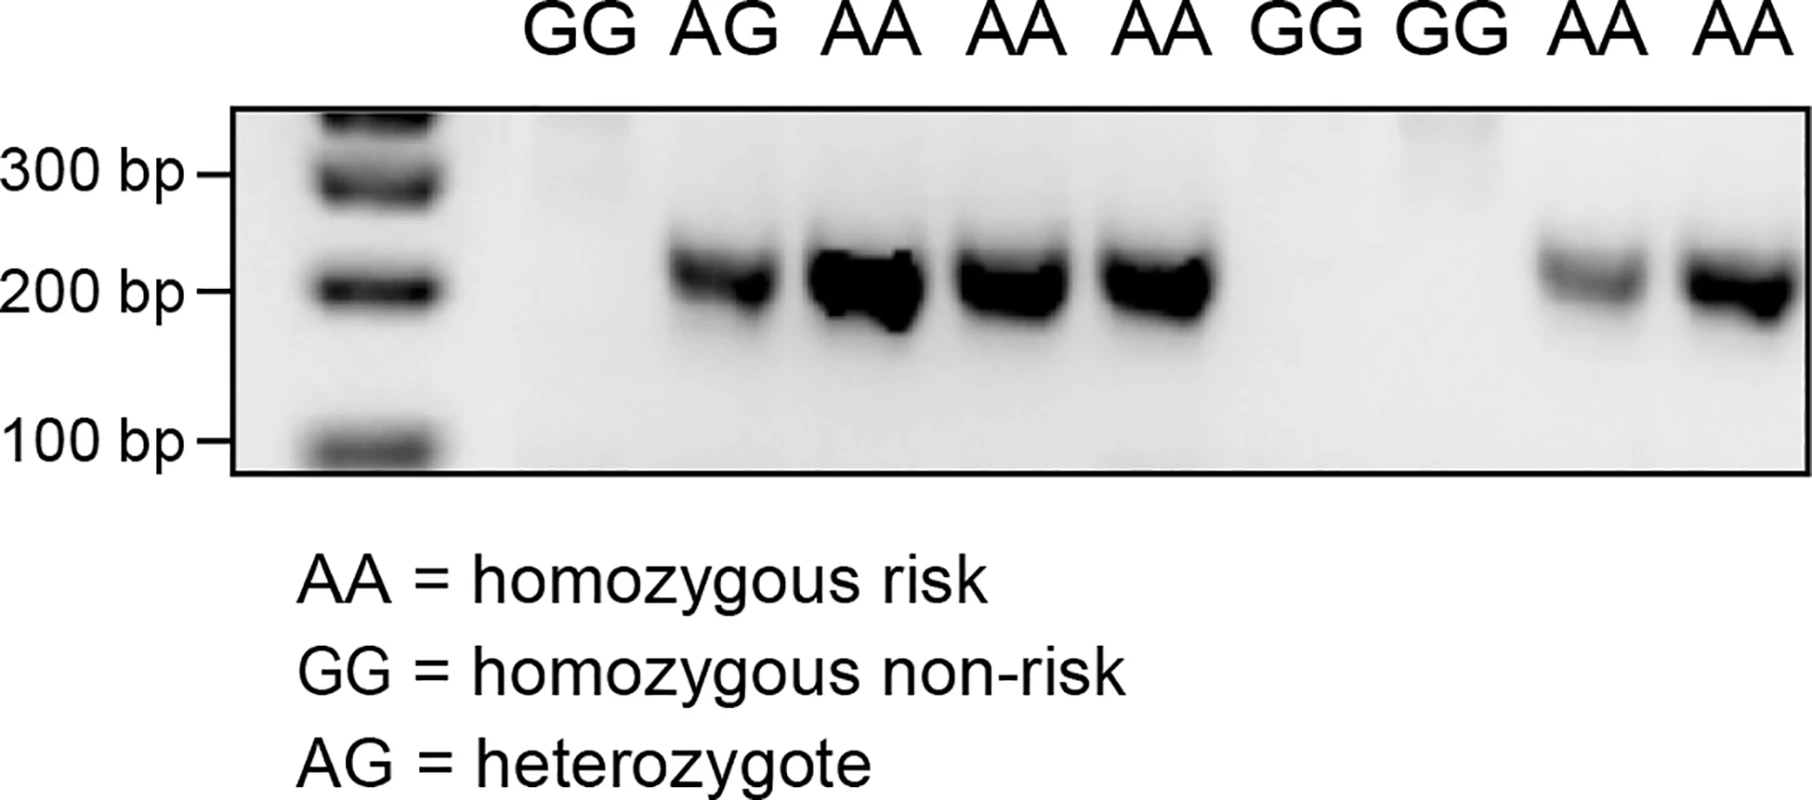 PCR products confirming the alternative splice site in the individuals carrying the A allele on CFA20: 42080147.